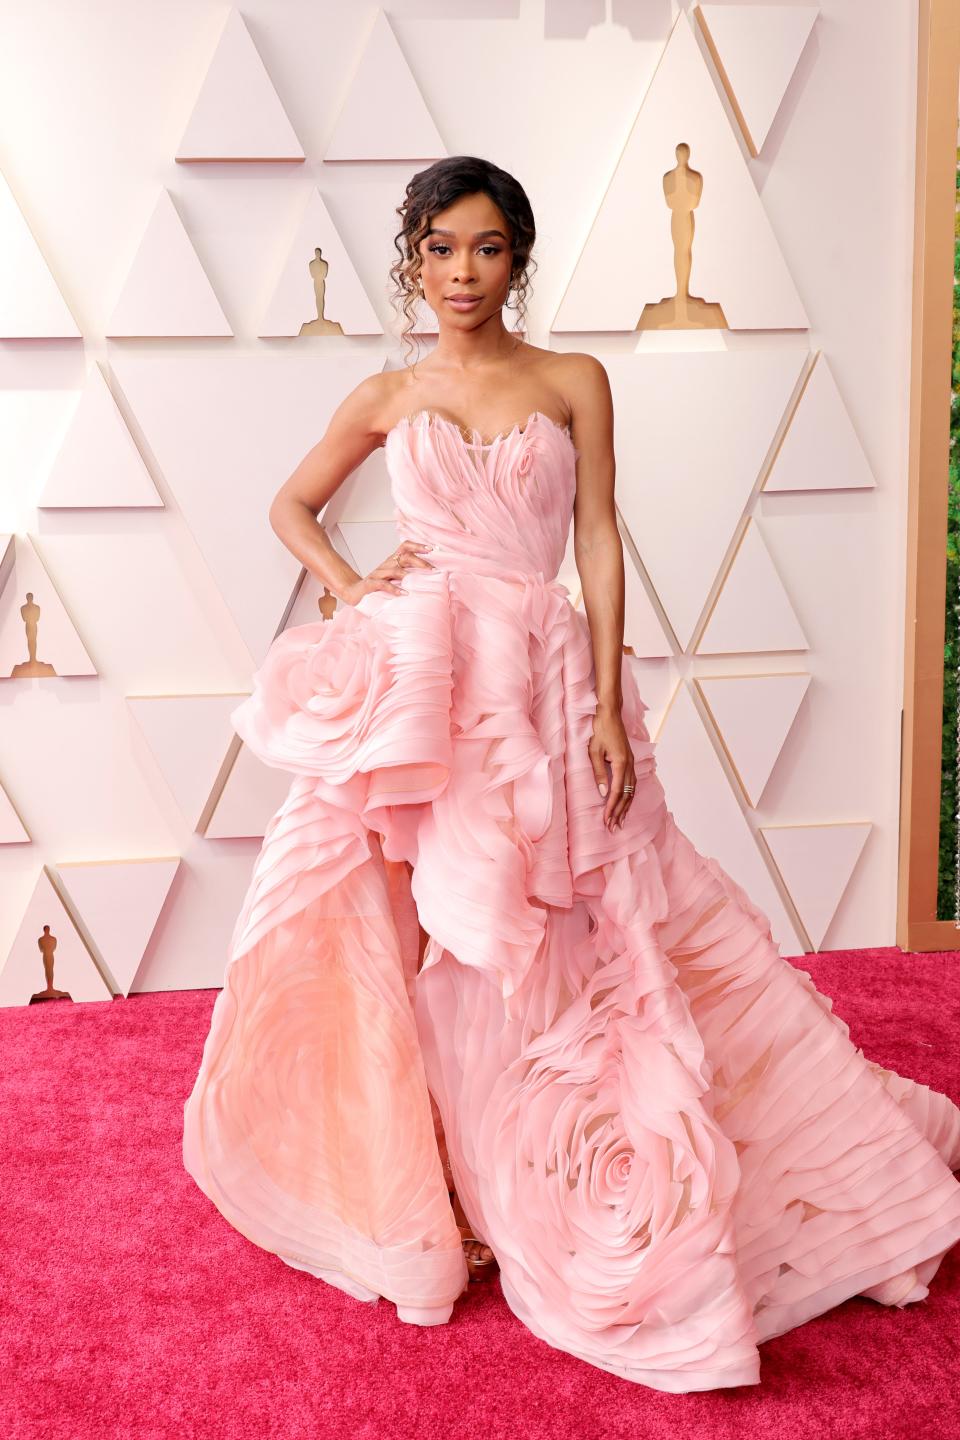 Zuri in a pink strapless voluminous gown with 3D flower petal detailing throughout.